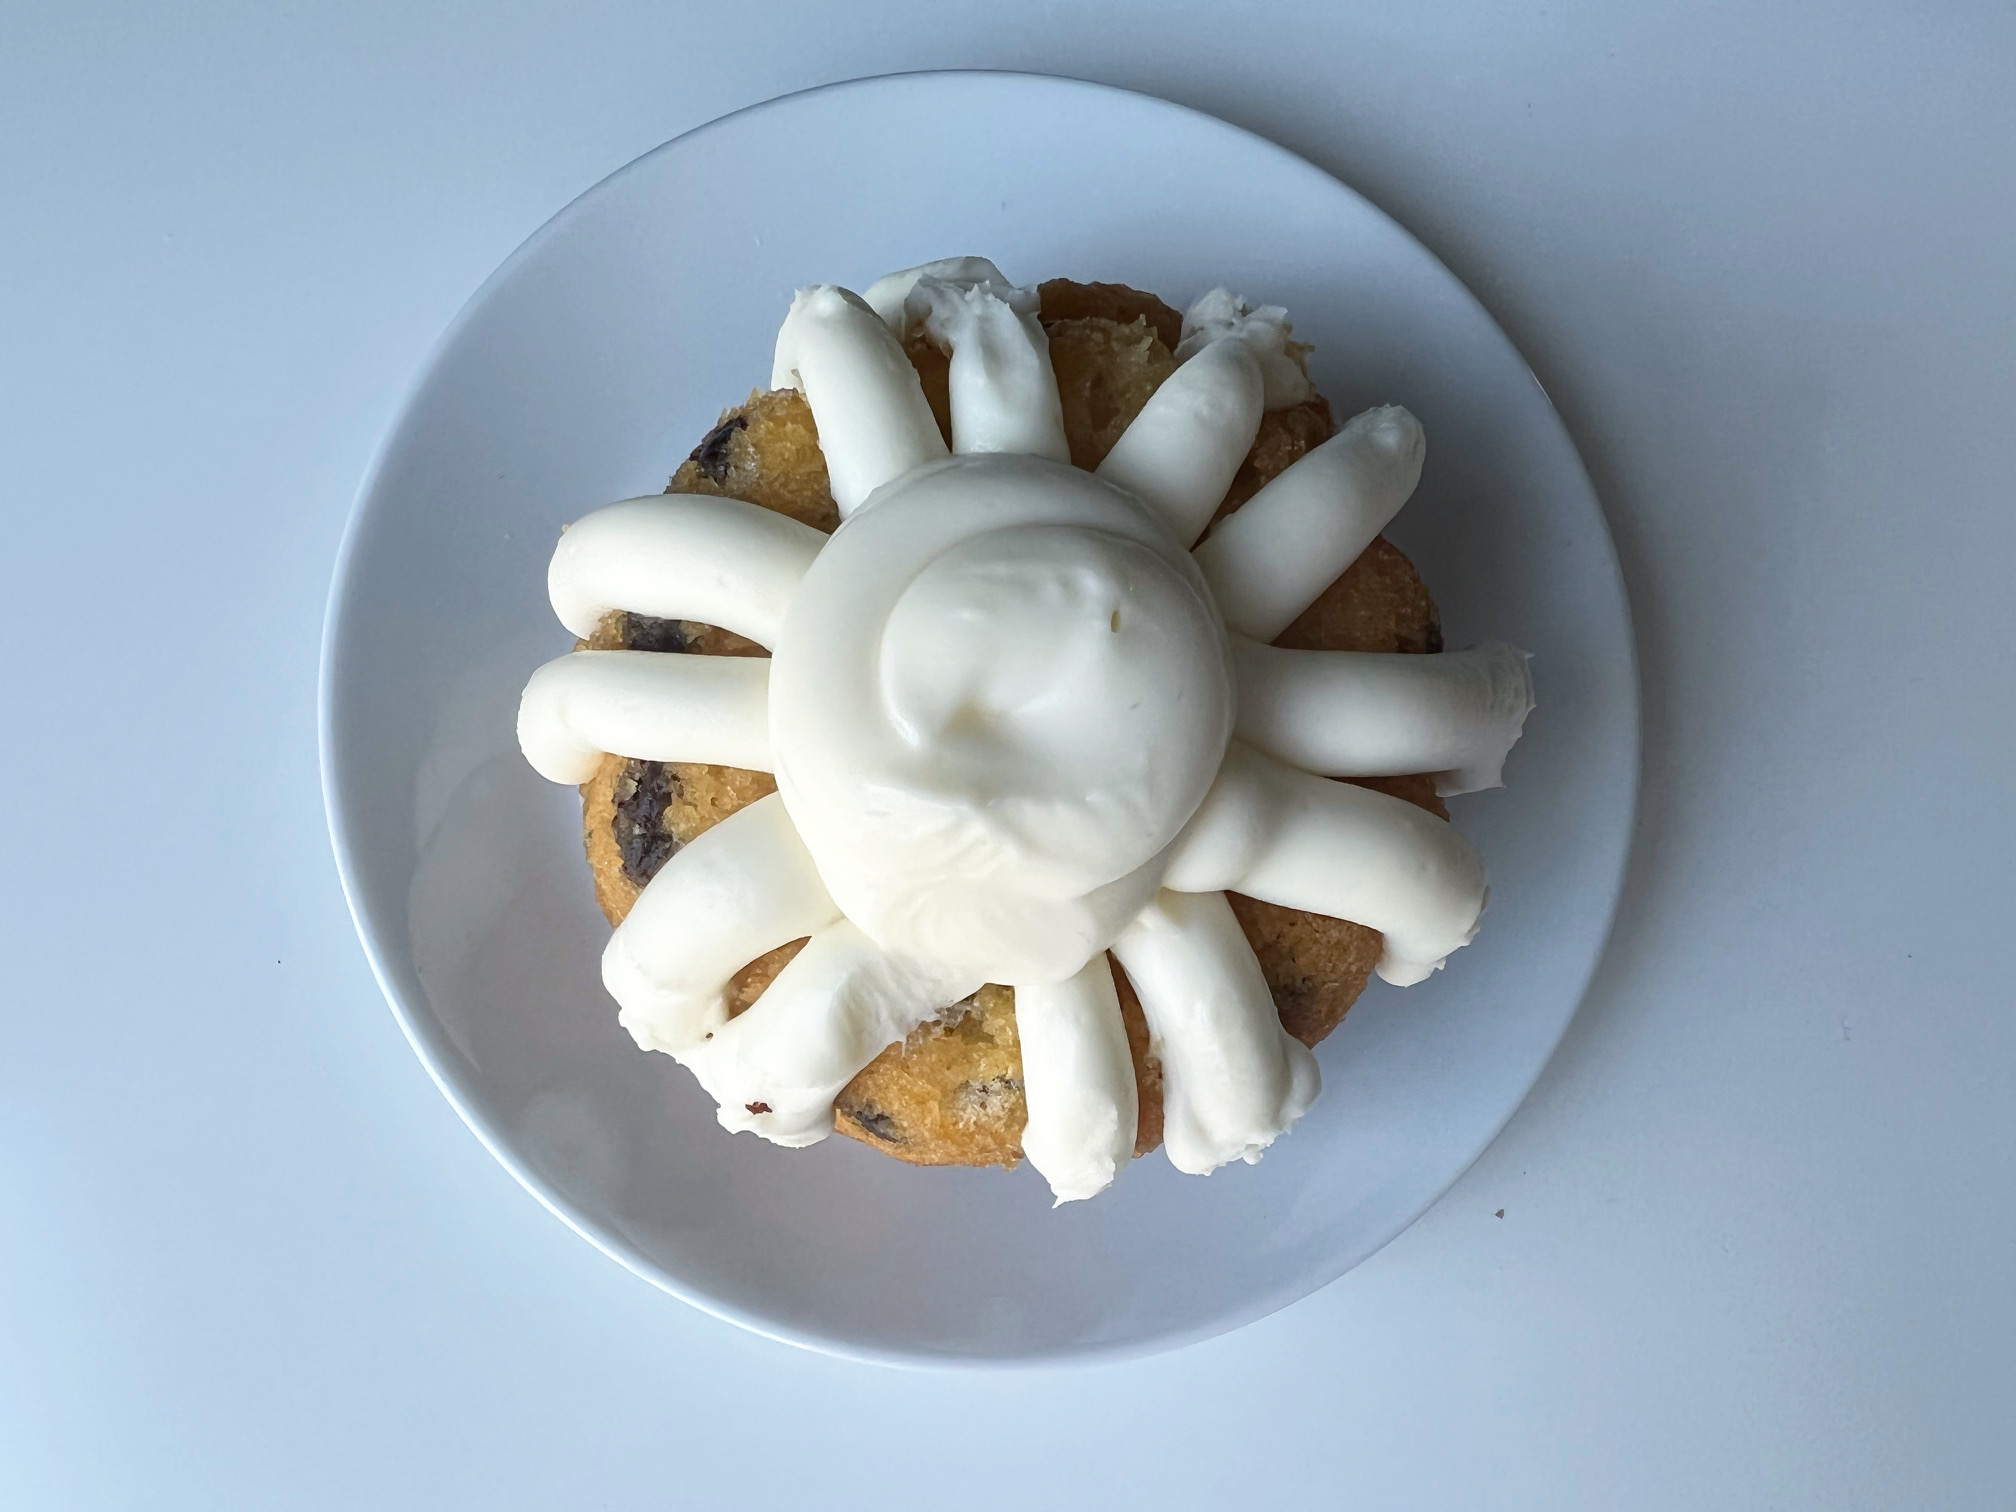 On a white plate on a white table, a chocolate chip bundtlet from Nothing Bundt Cakes is uncut and uneaten. Photo by Alyssa Buckley.